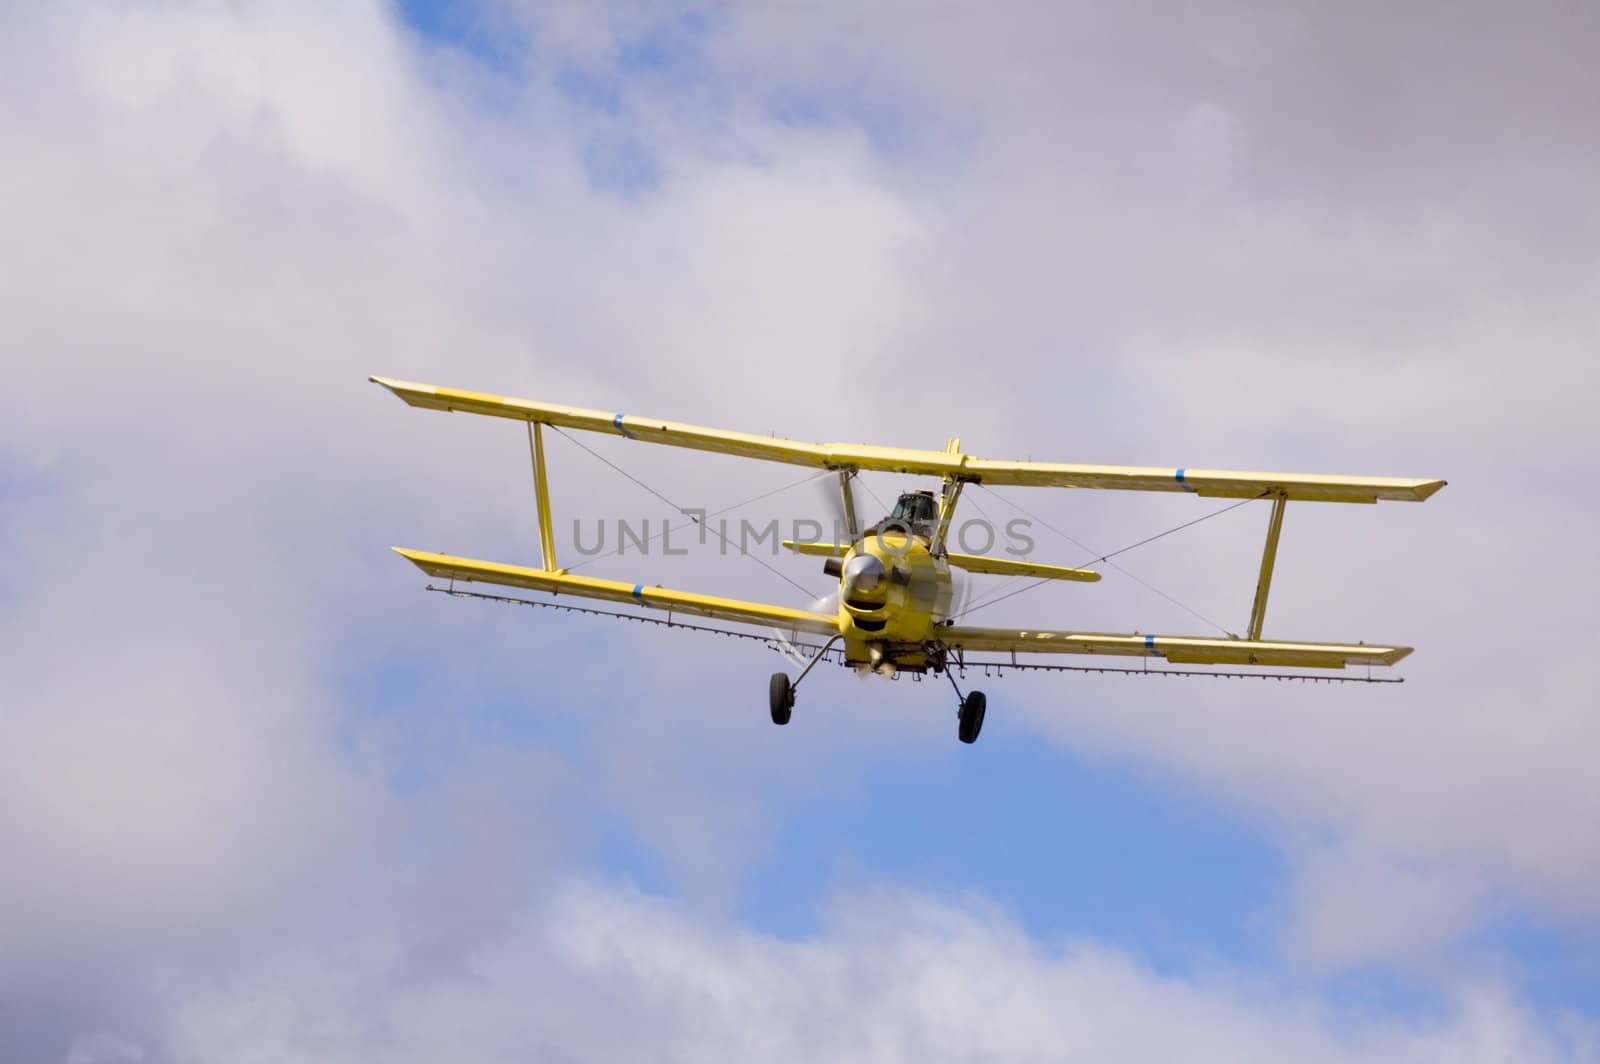 Aircraft-Crop duster spraying fields with chemical insecticides to prevent spoilage